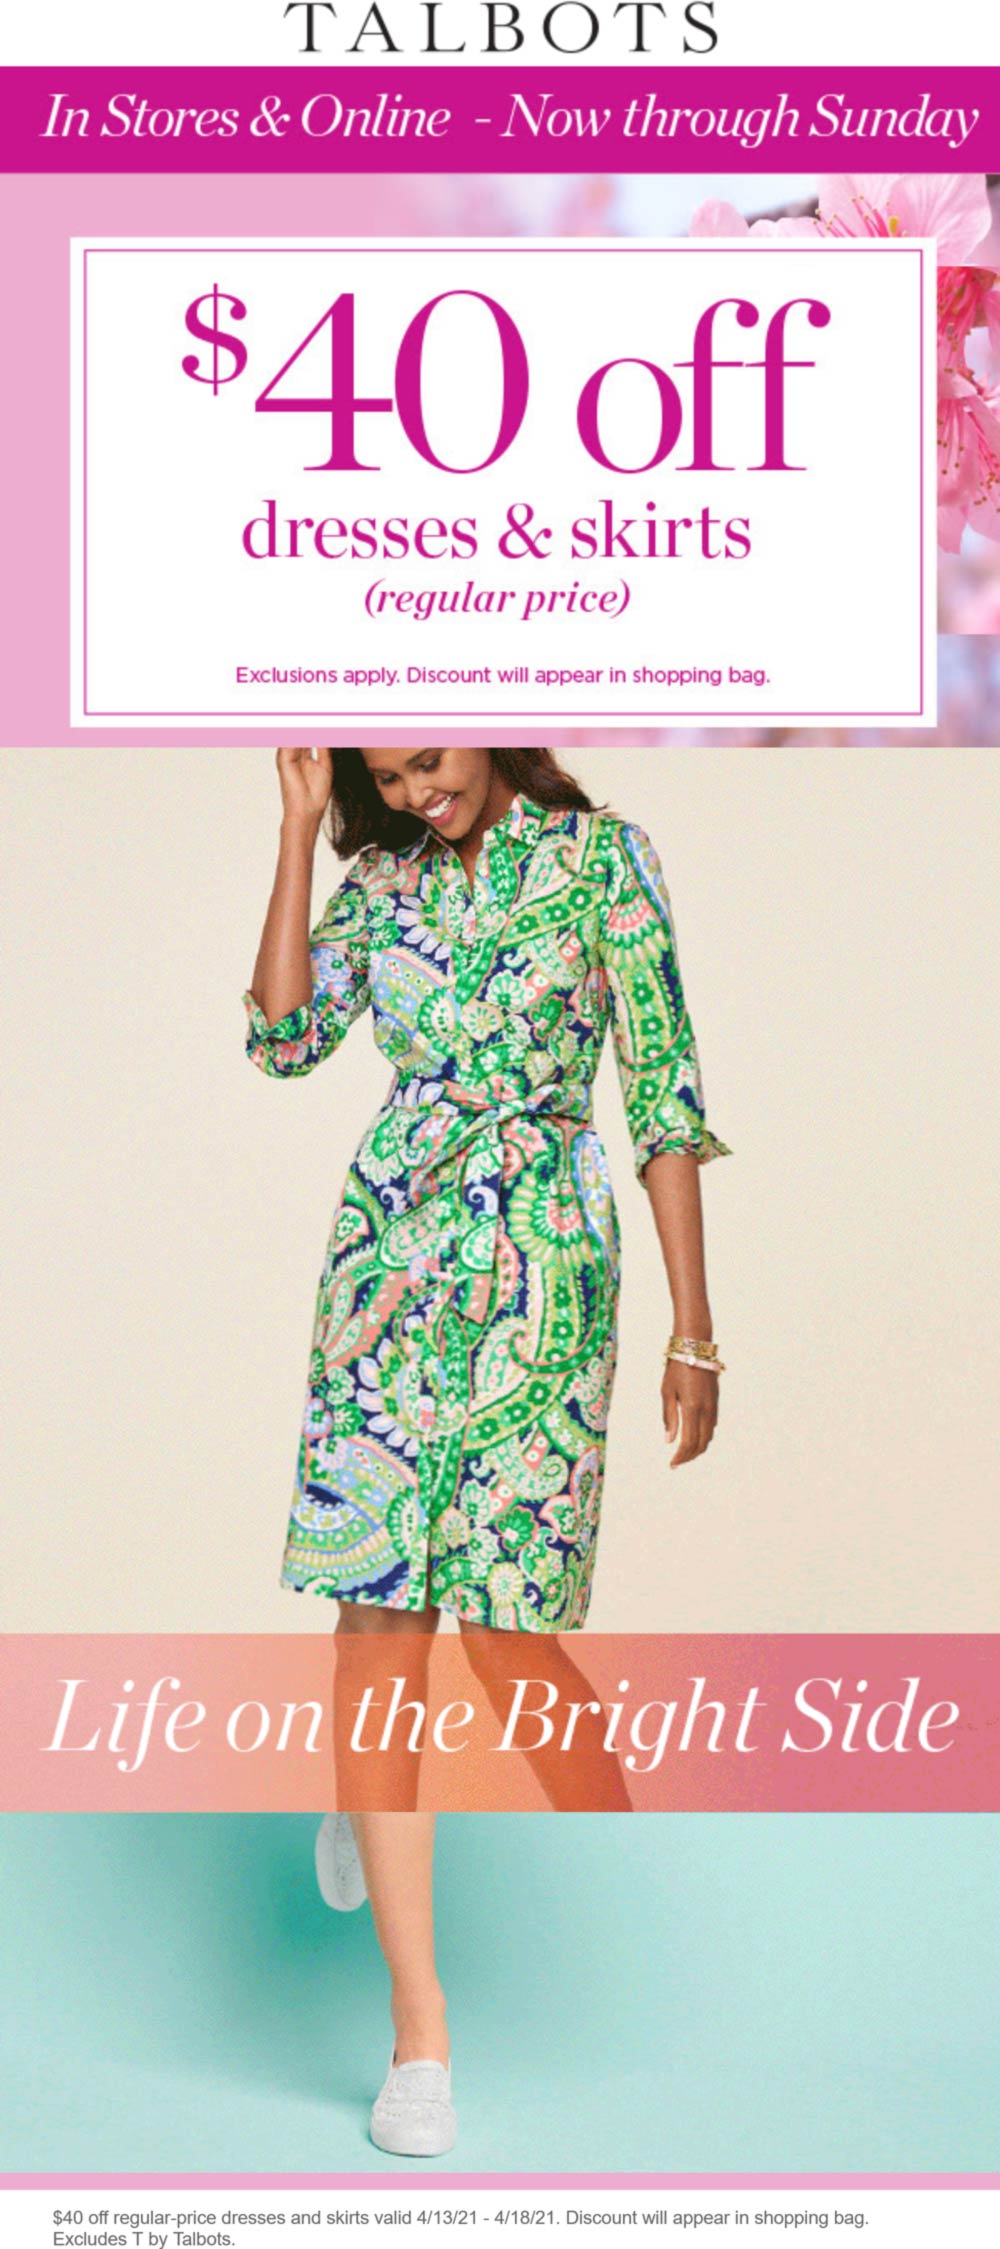 Talbots stores Coupon  $40 off dresses & skirts at Talbots, ditto online #talbots 